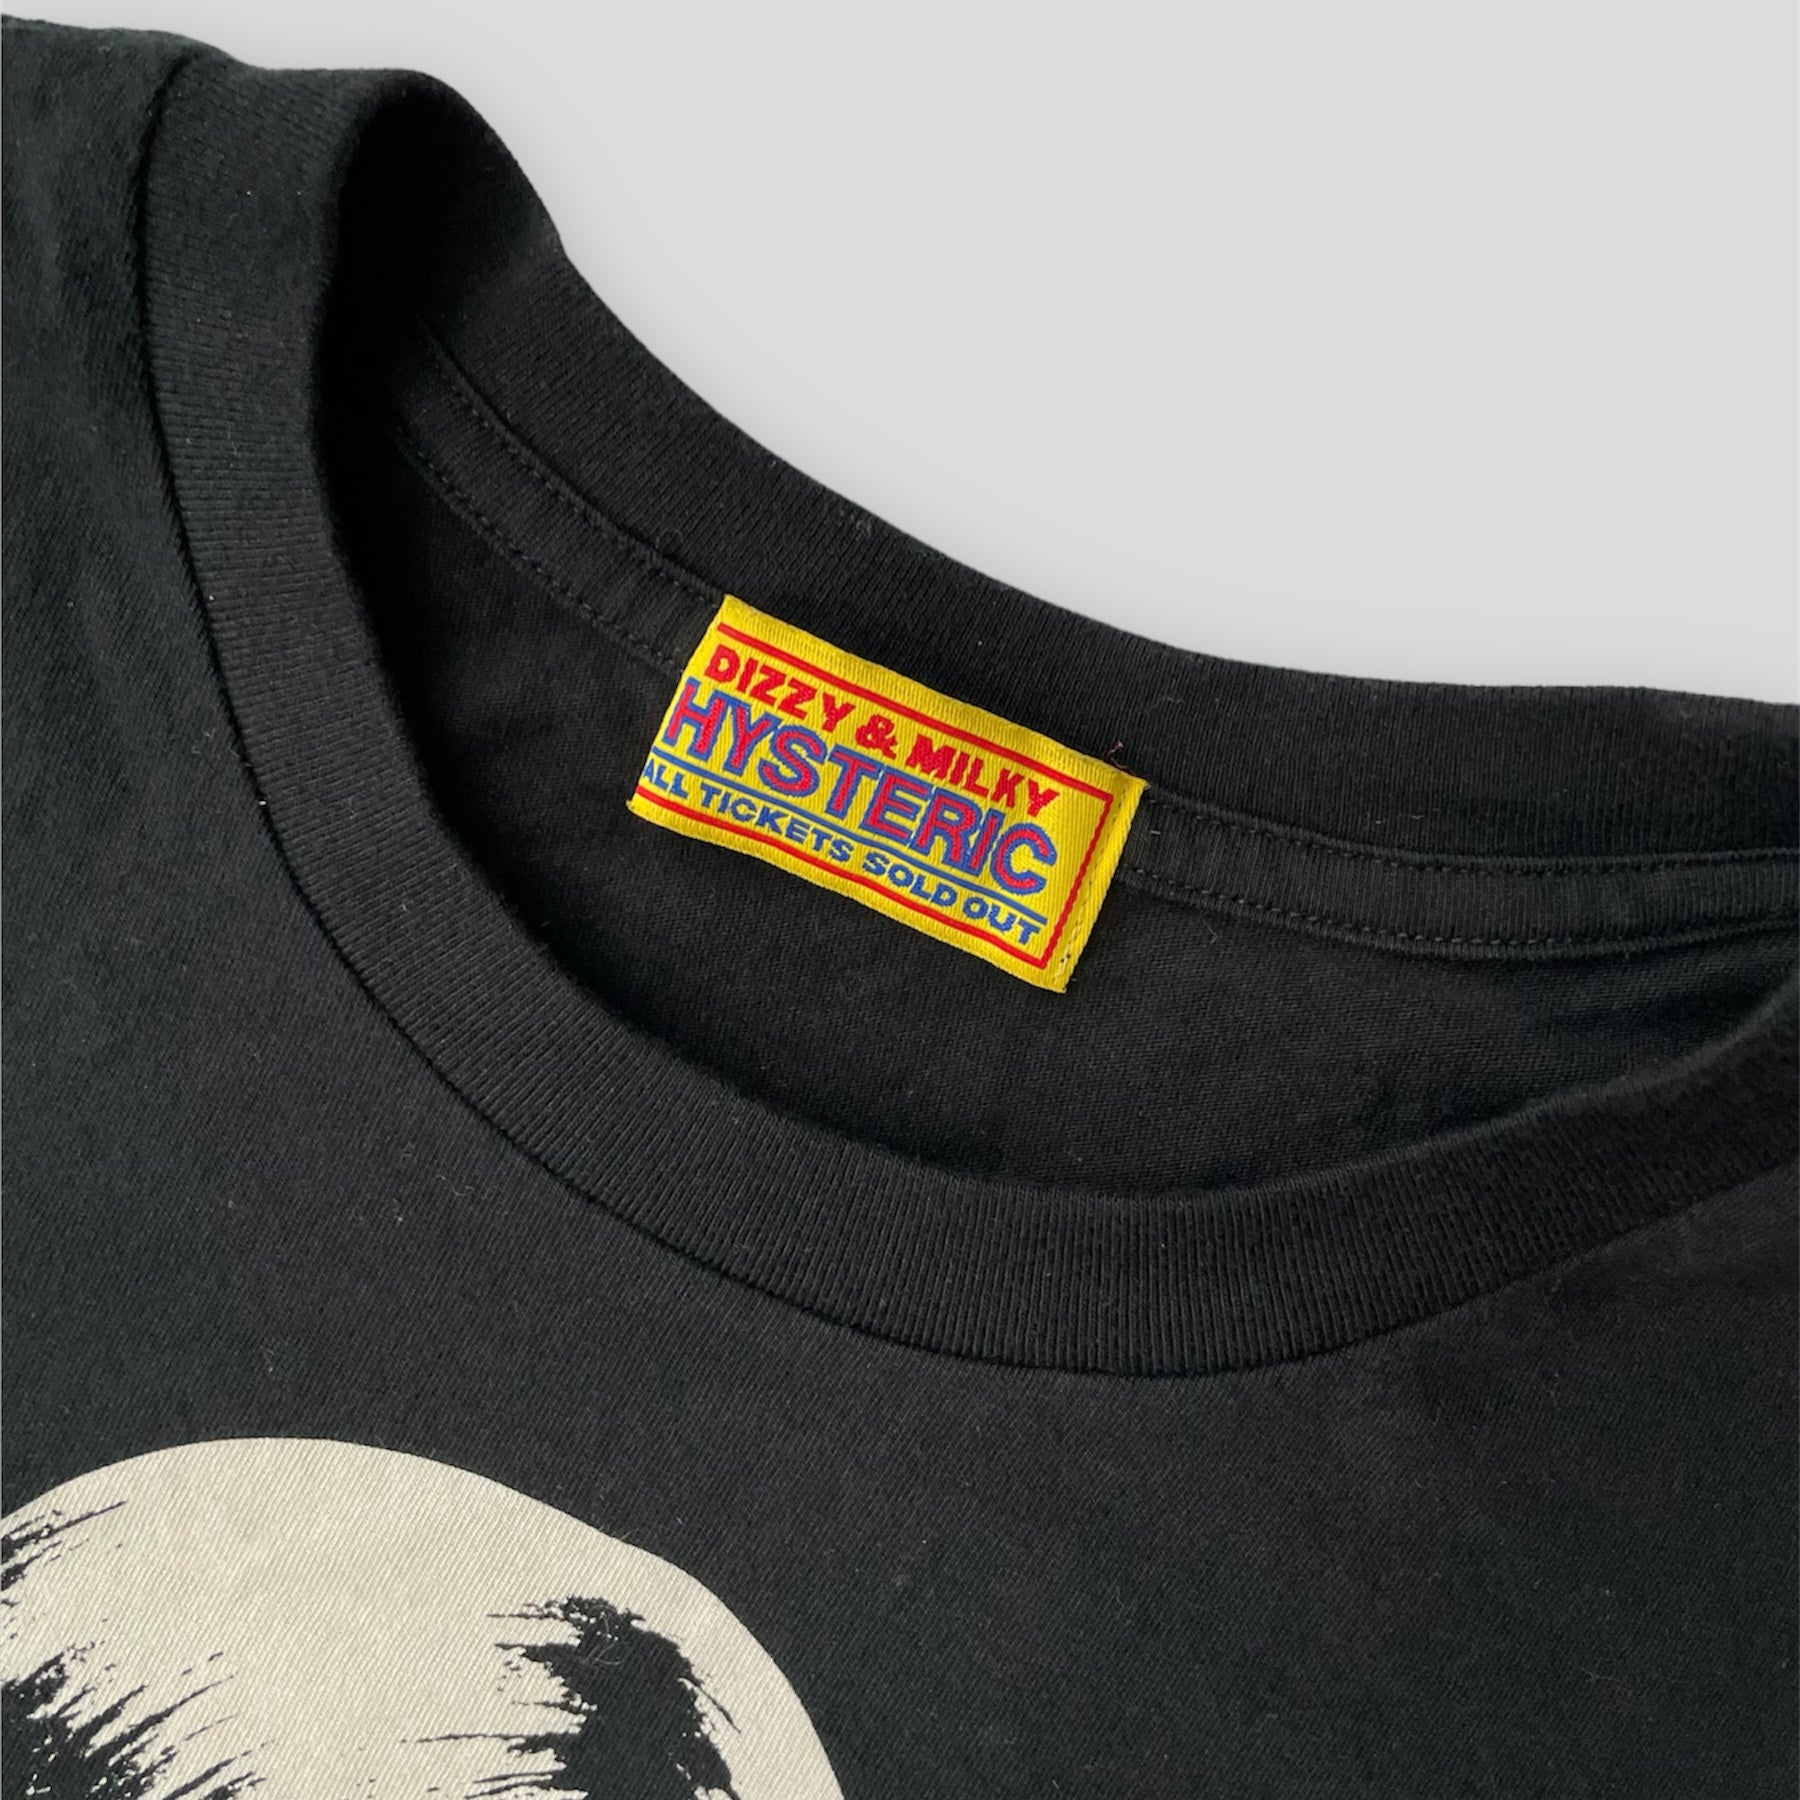 Hysteric Glamour Black Monochrome Graphic Tee - XS/M